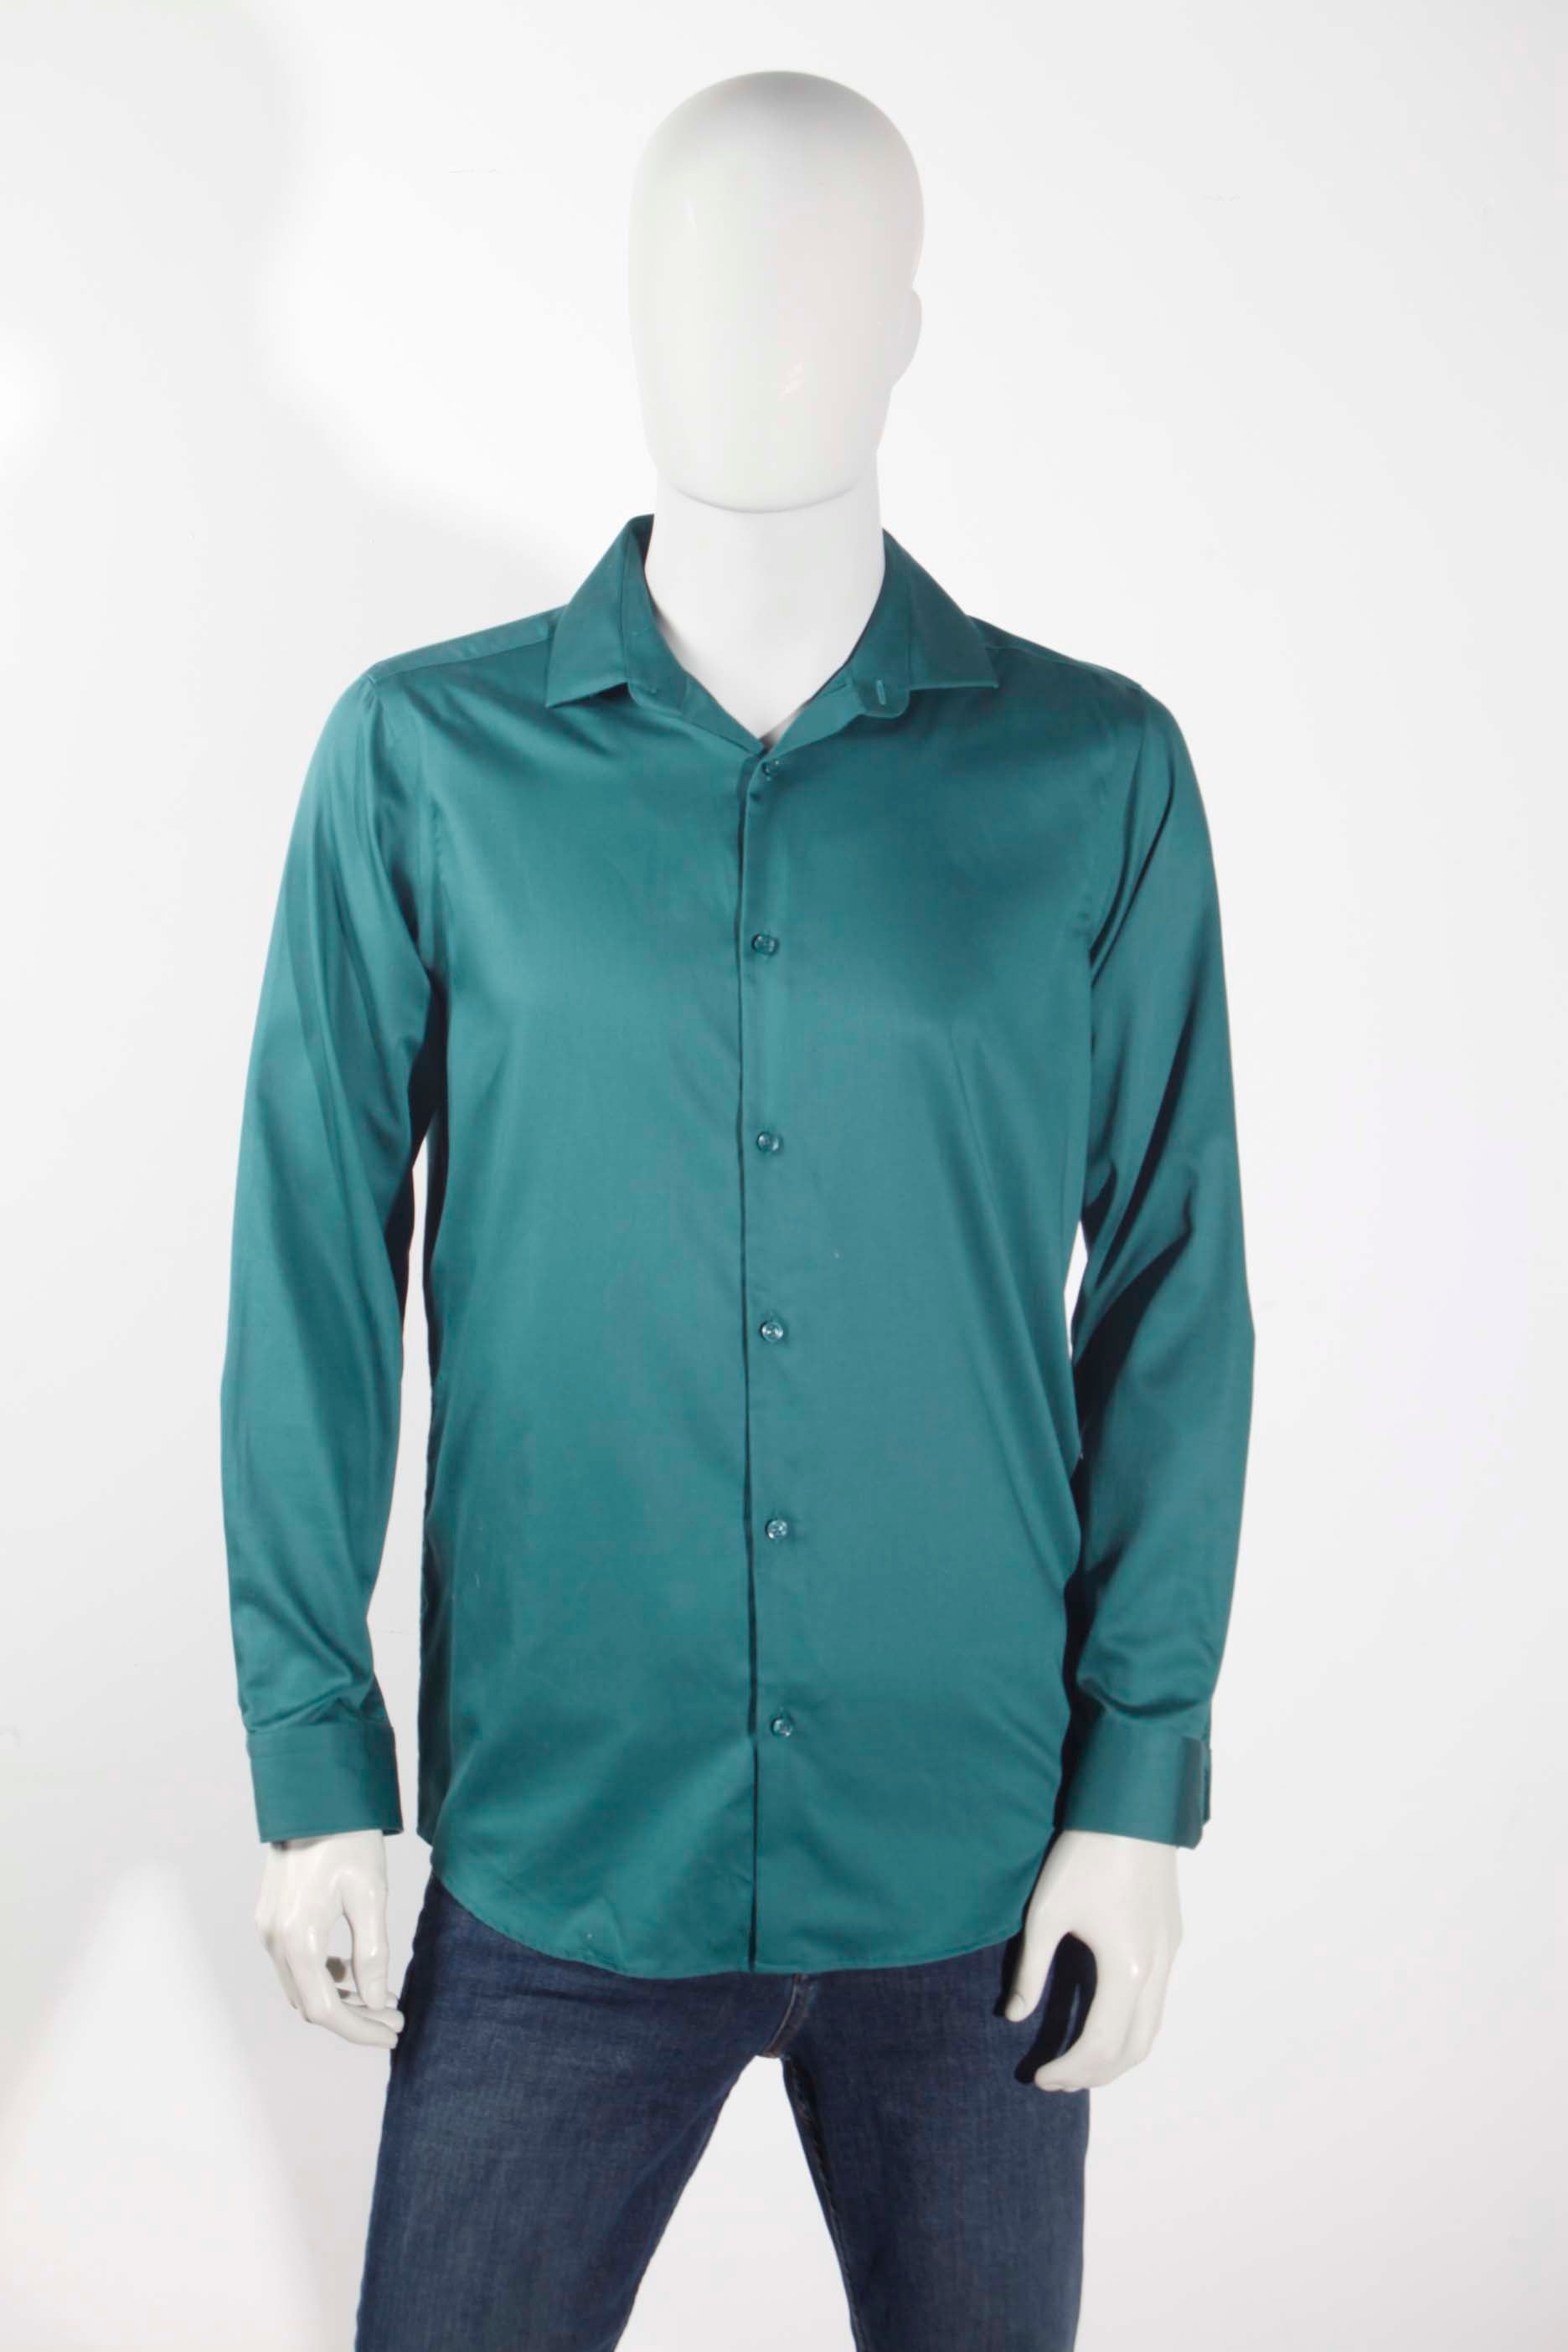 Men's Turquoise-Green Stretch Shirt (Large)